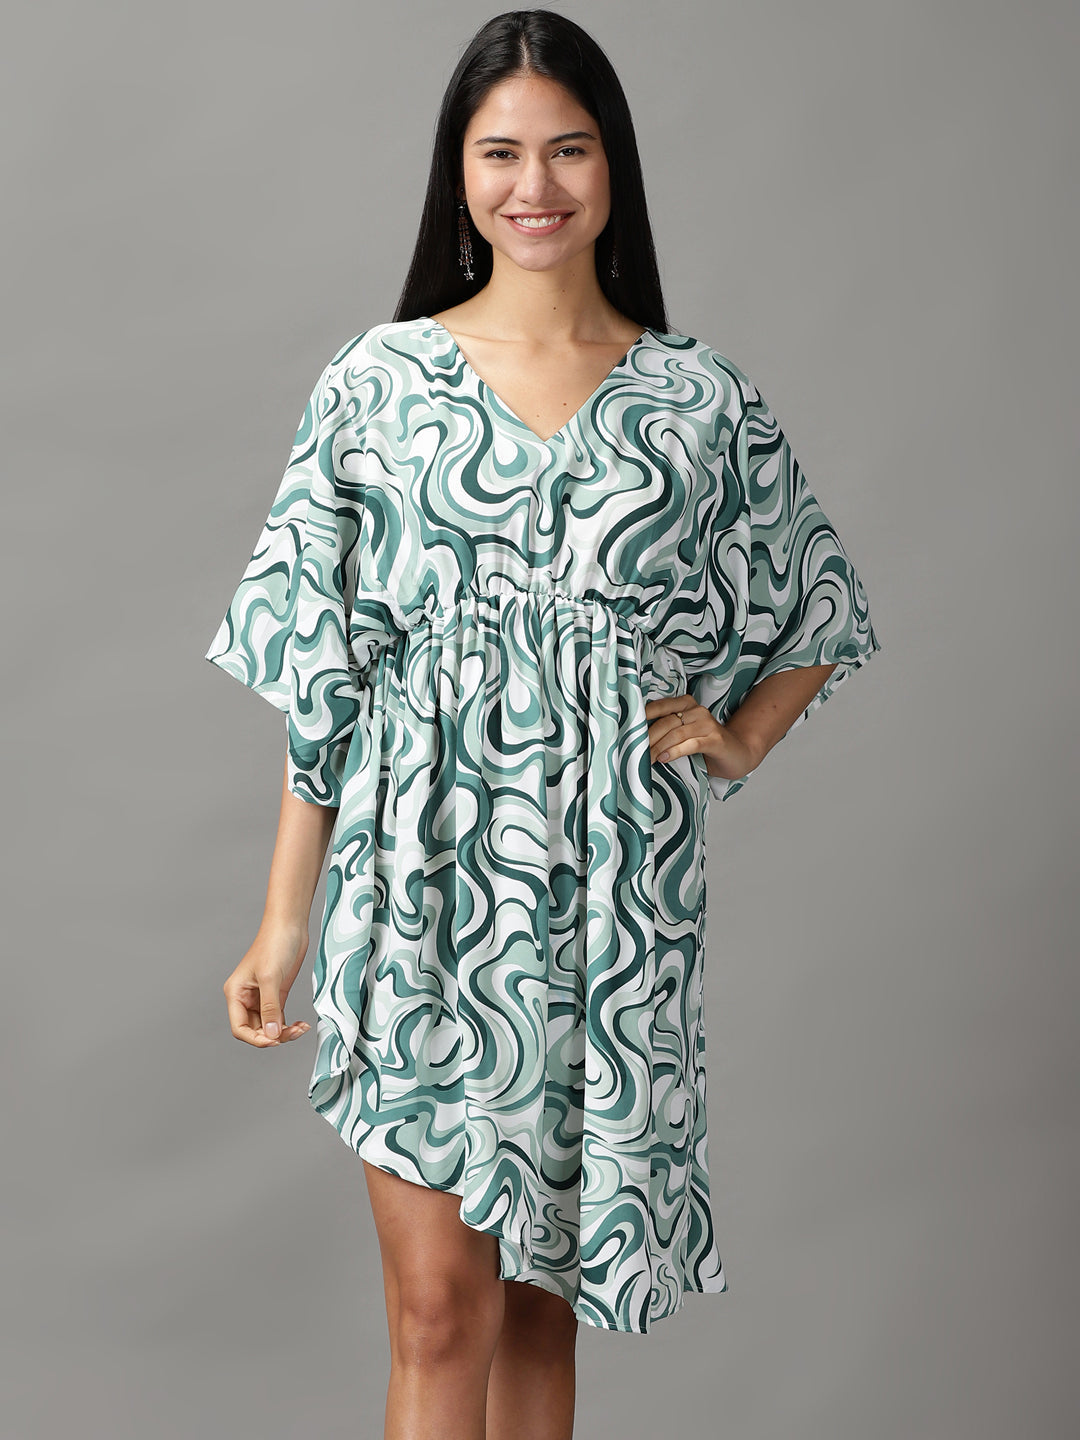 Women's Green Printed Fit and Flare Dress